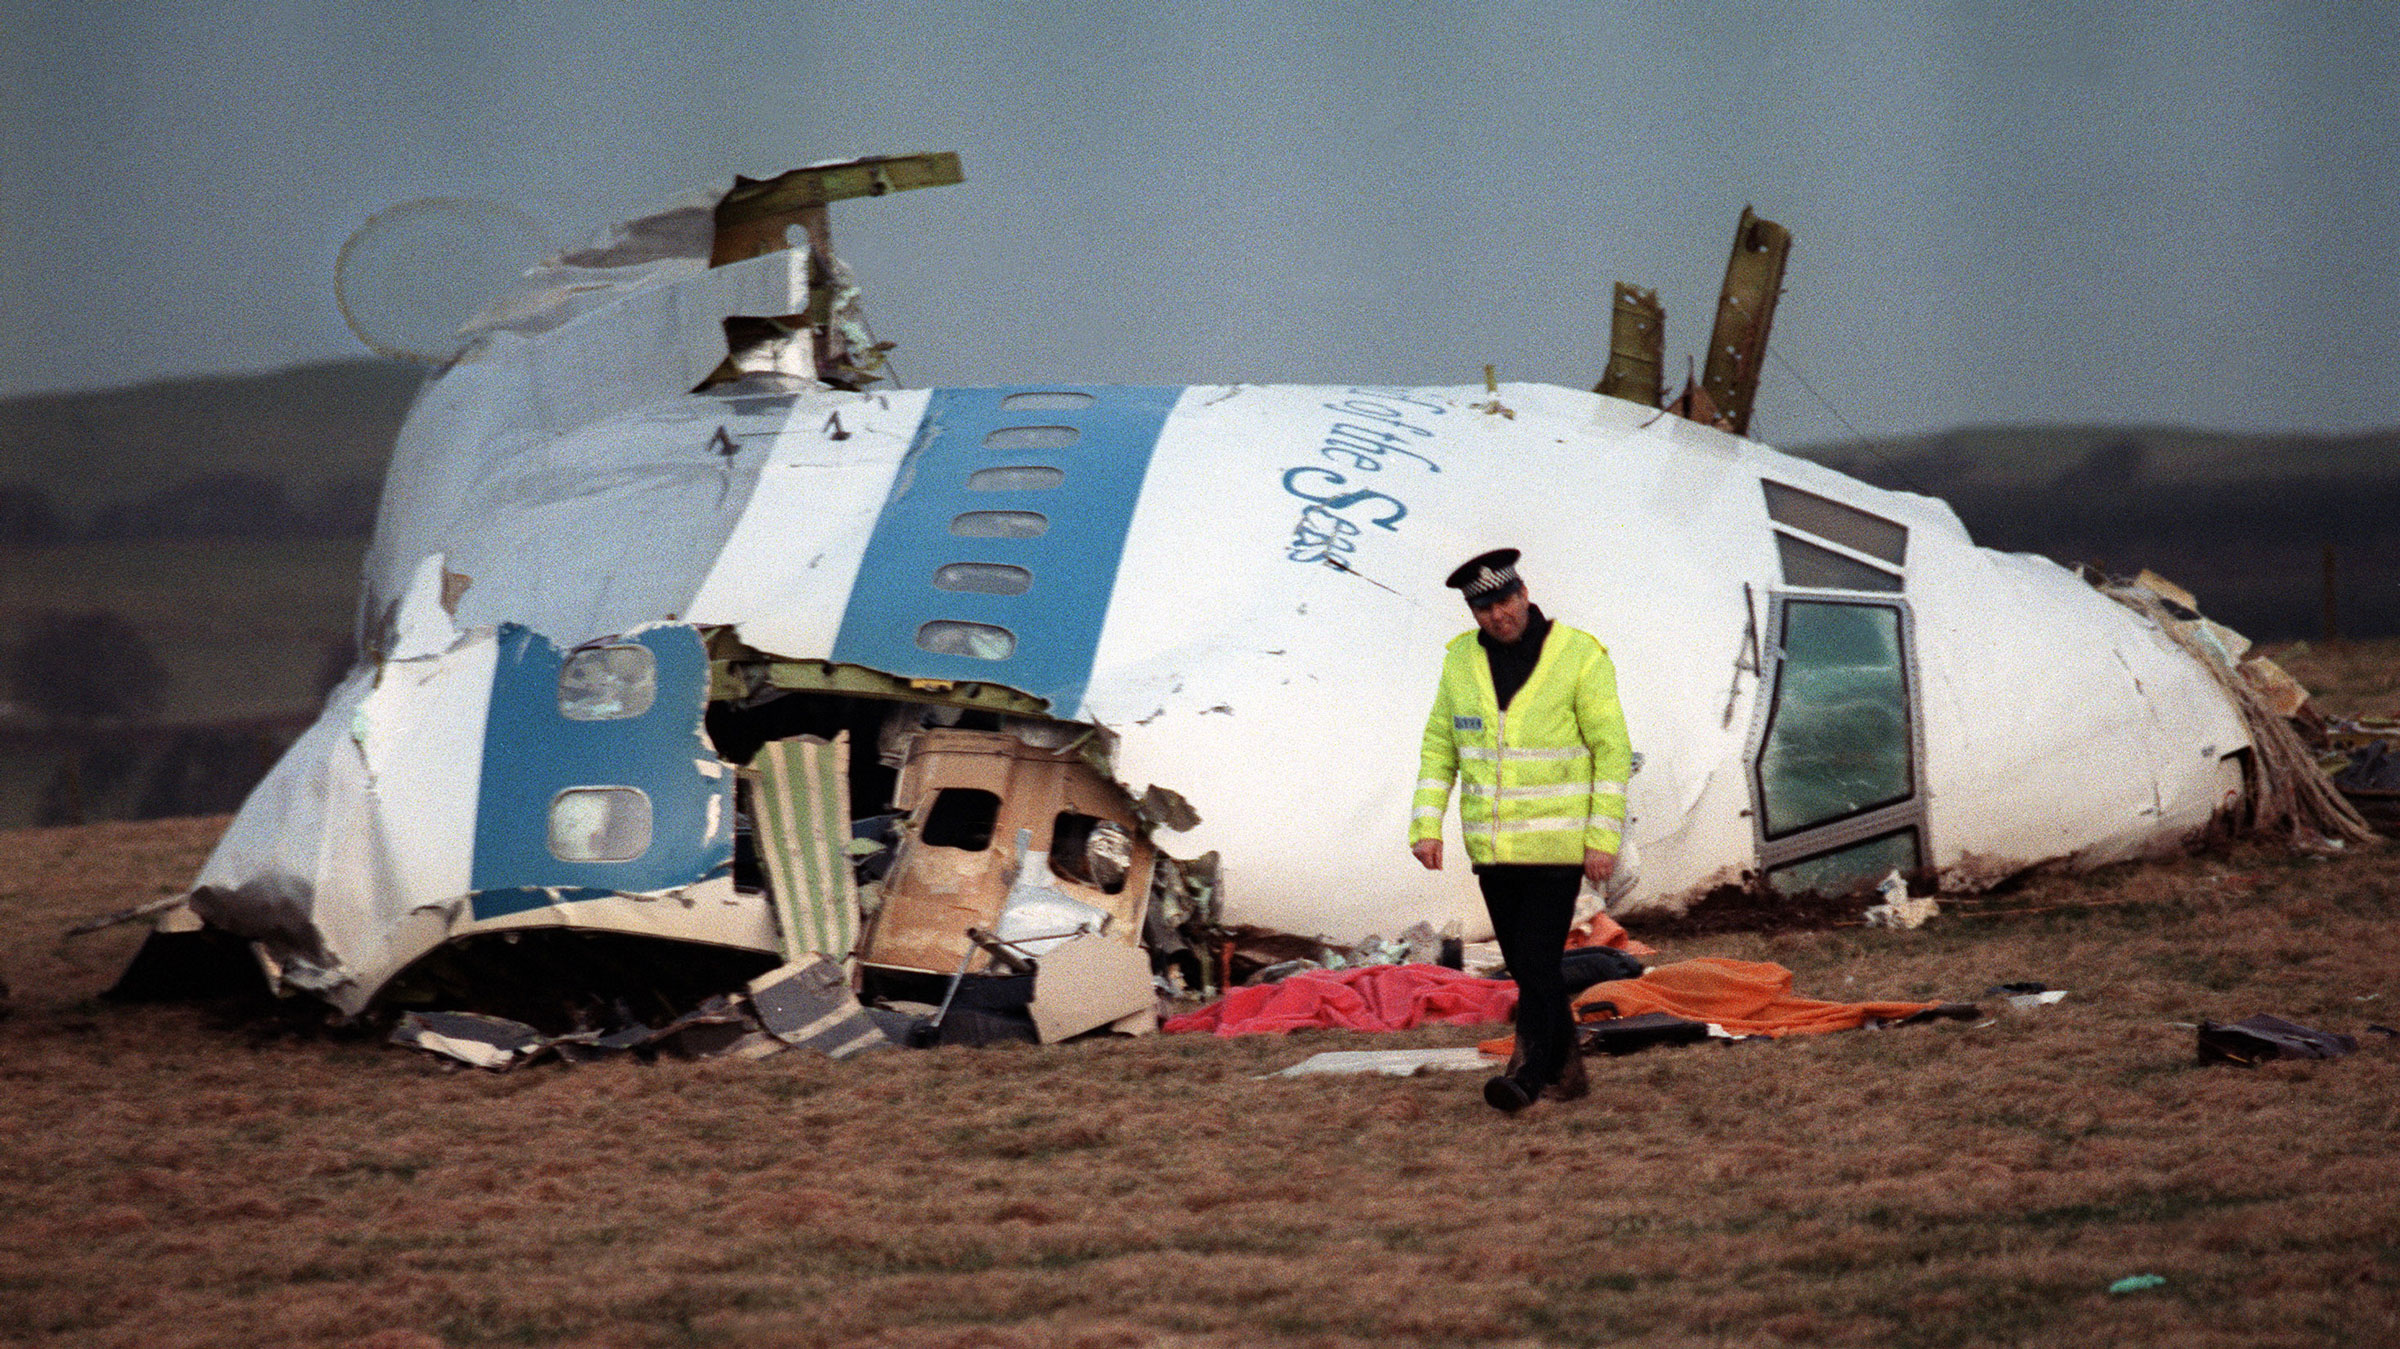 A police officer walks away from the wreckage of the jet that exploded and crashed over Lockerbie, Scotland, in 1988.